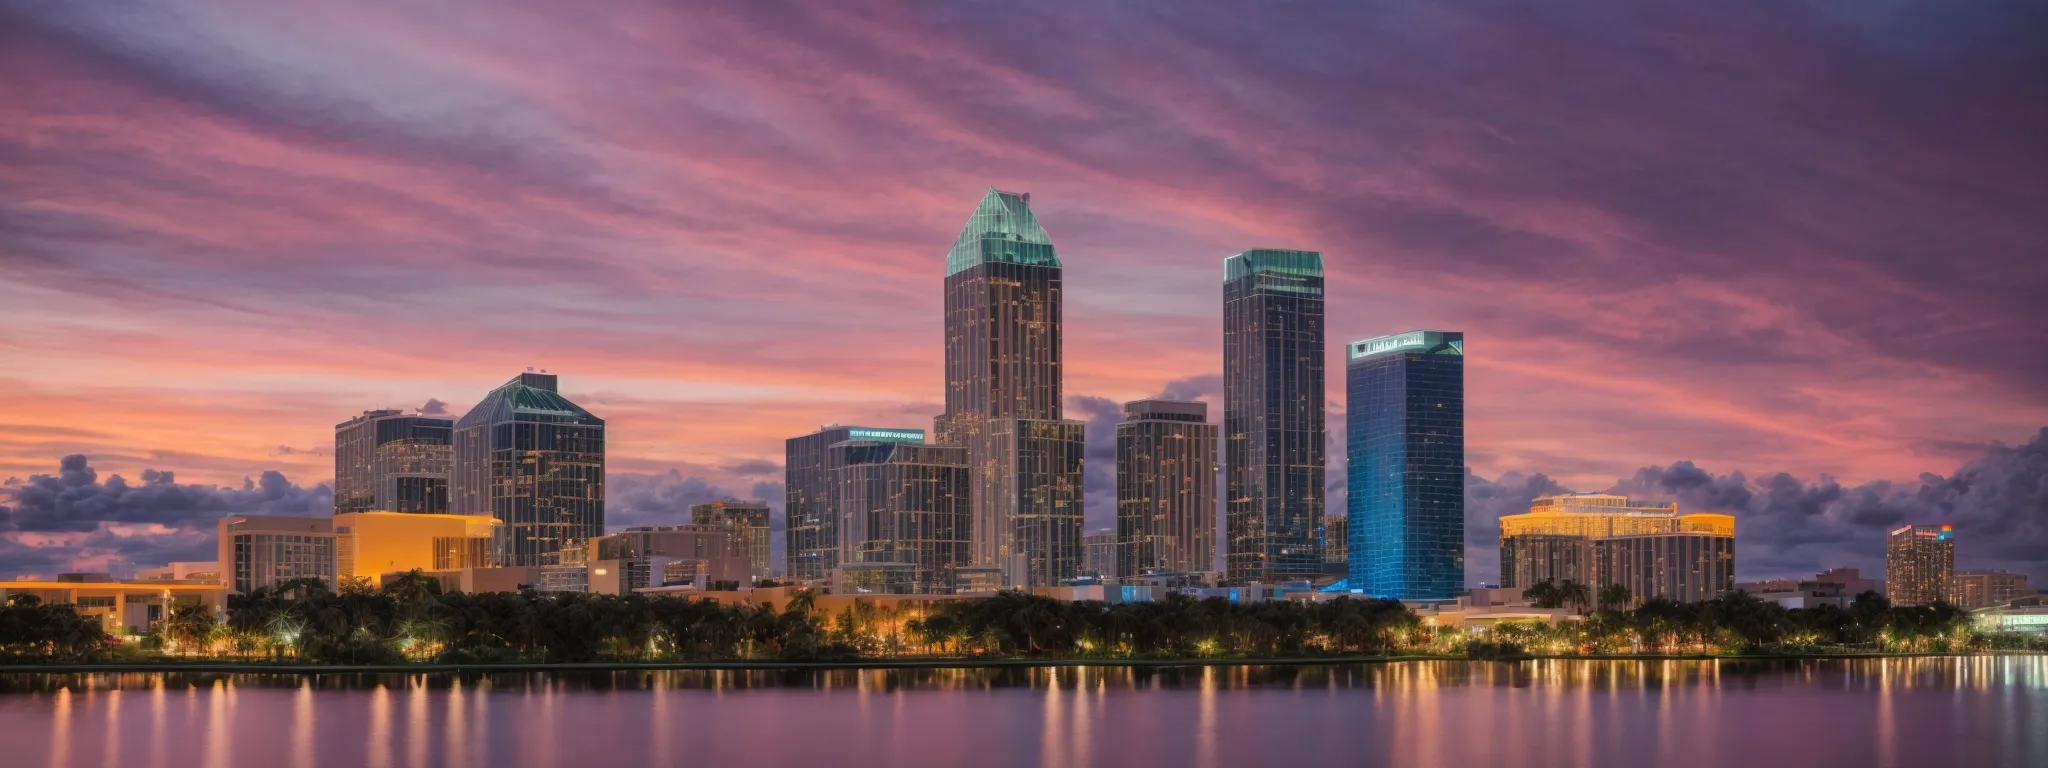 a vibrant orlando skyline reflects in the tranquil water at twilight, symbolizing the city's dynamic online presence.